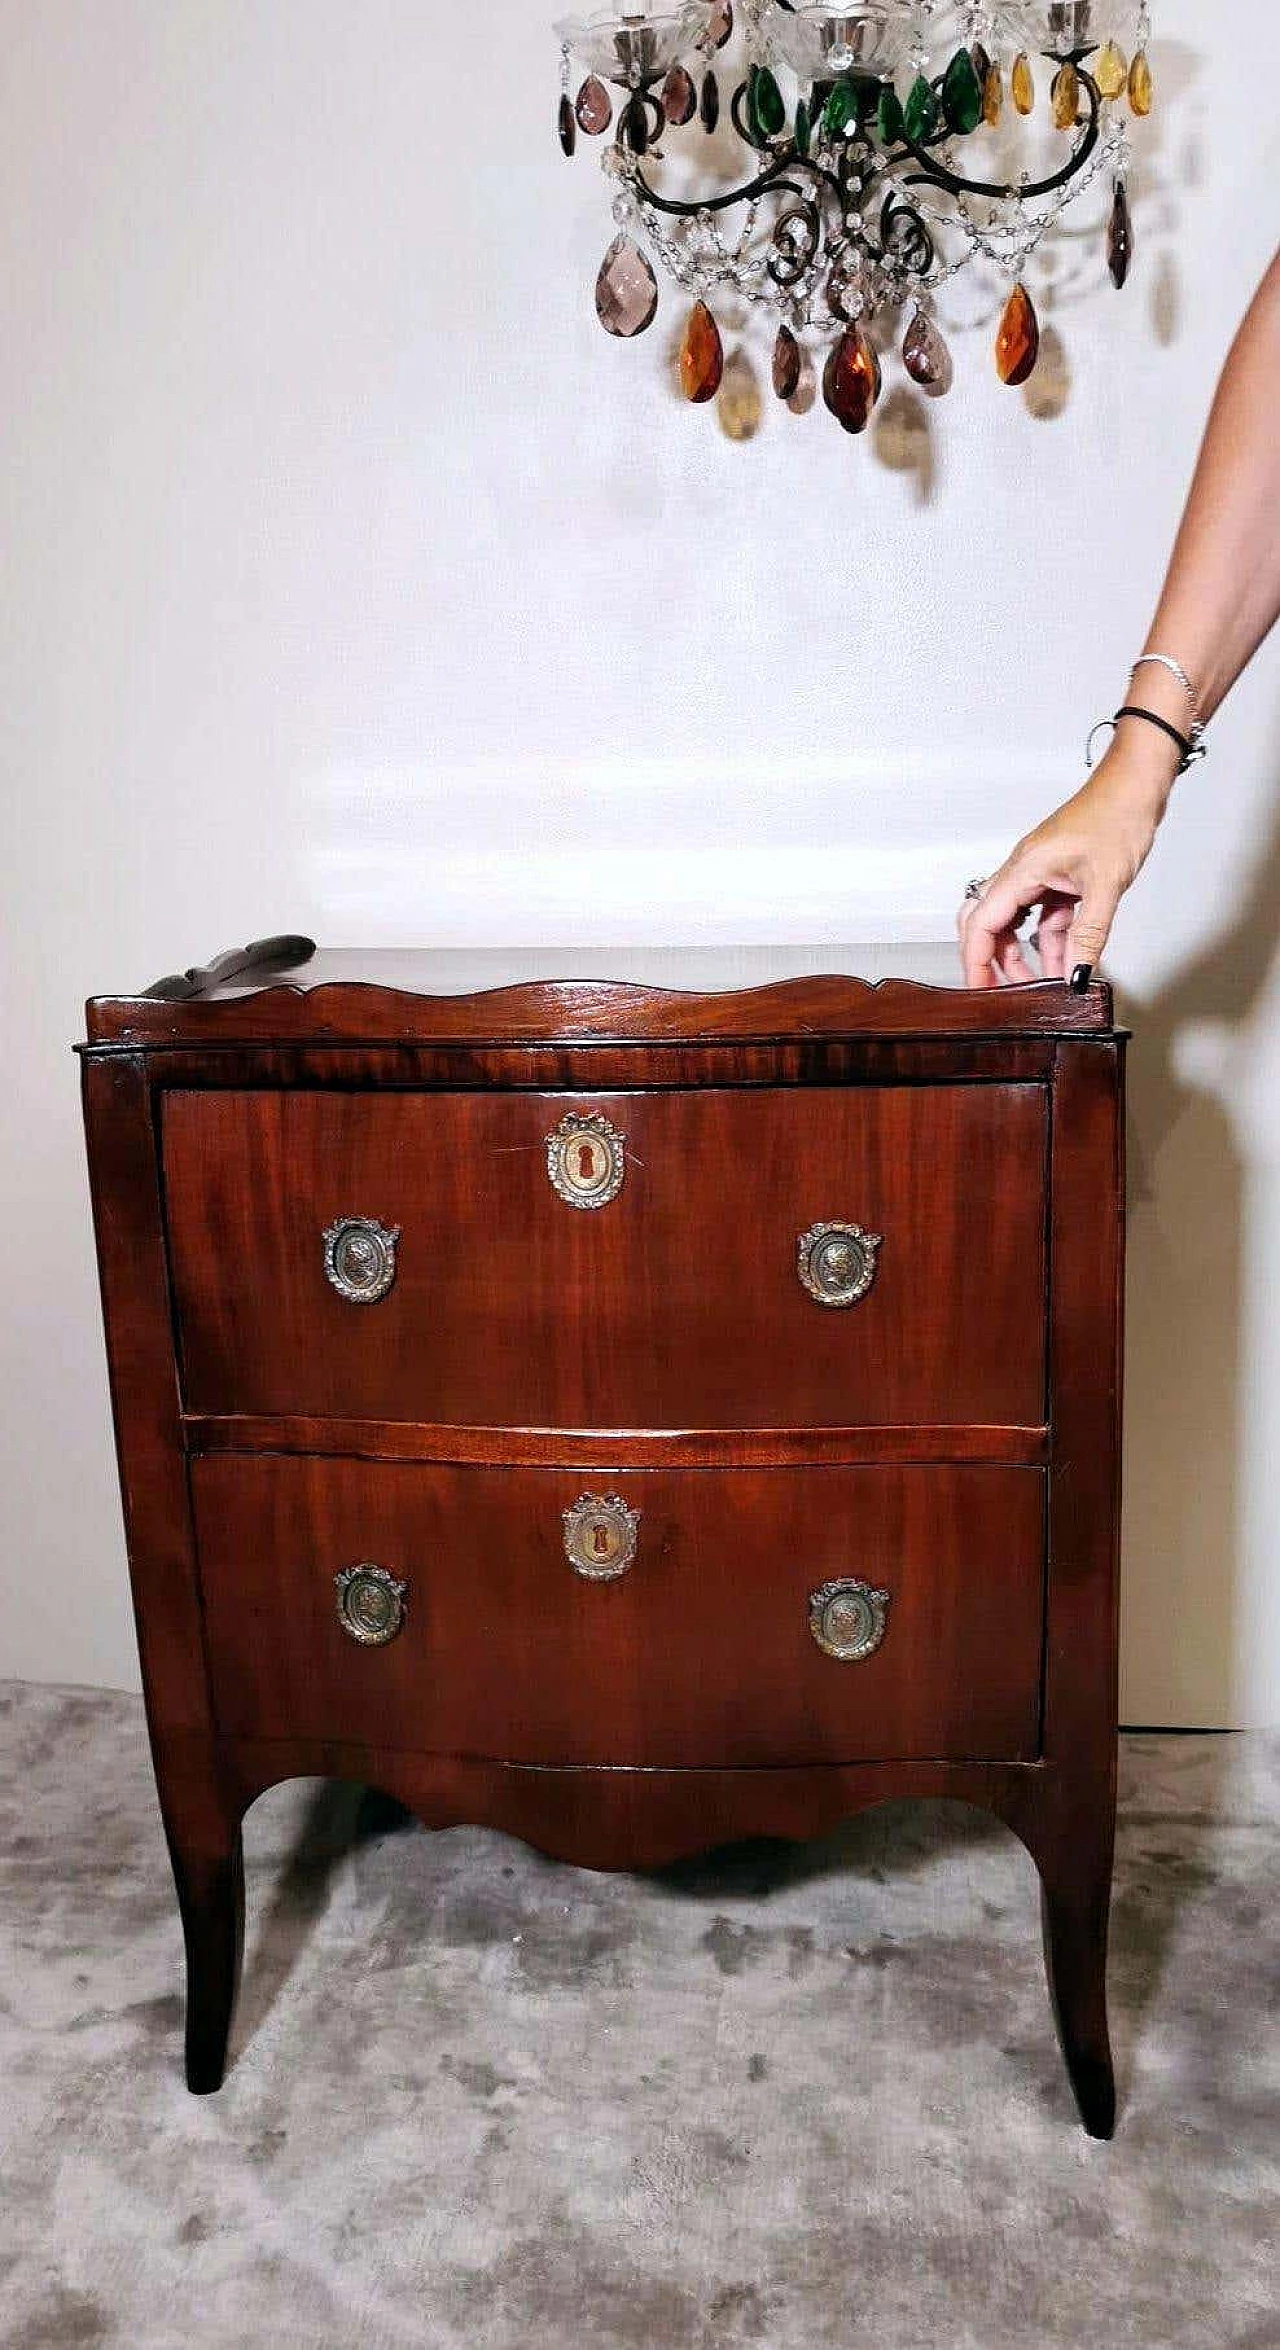 Neoclassical style chest of drawers in mahogany with bronze decorations, 18th century 1332982